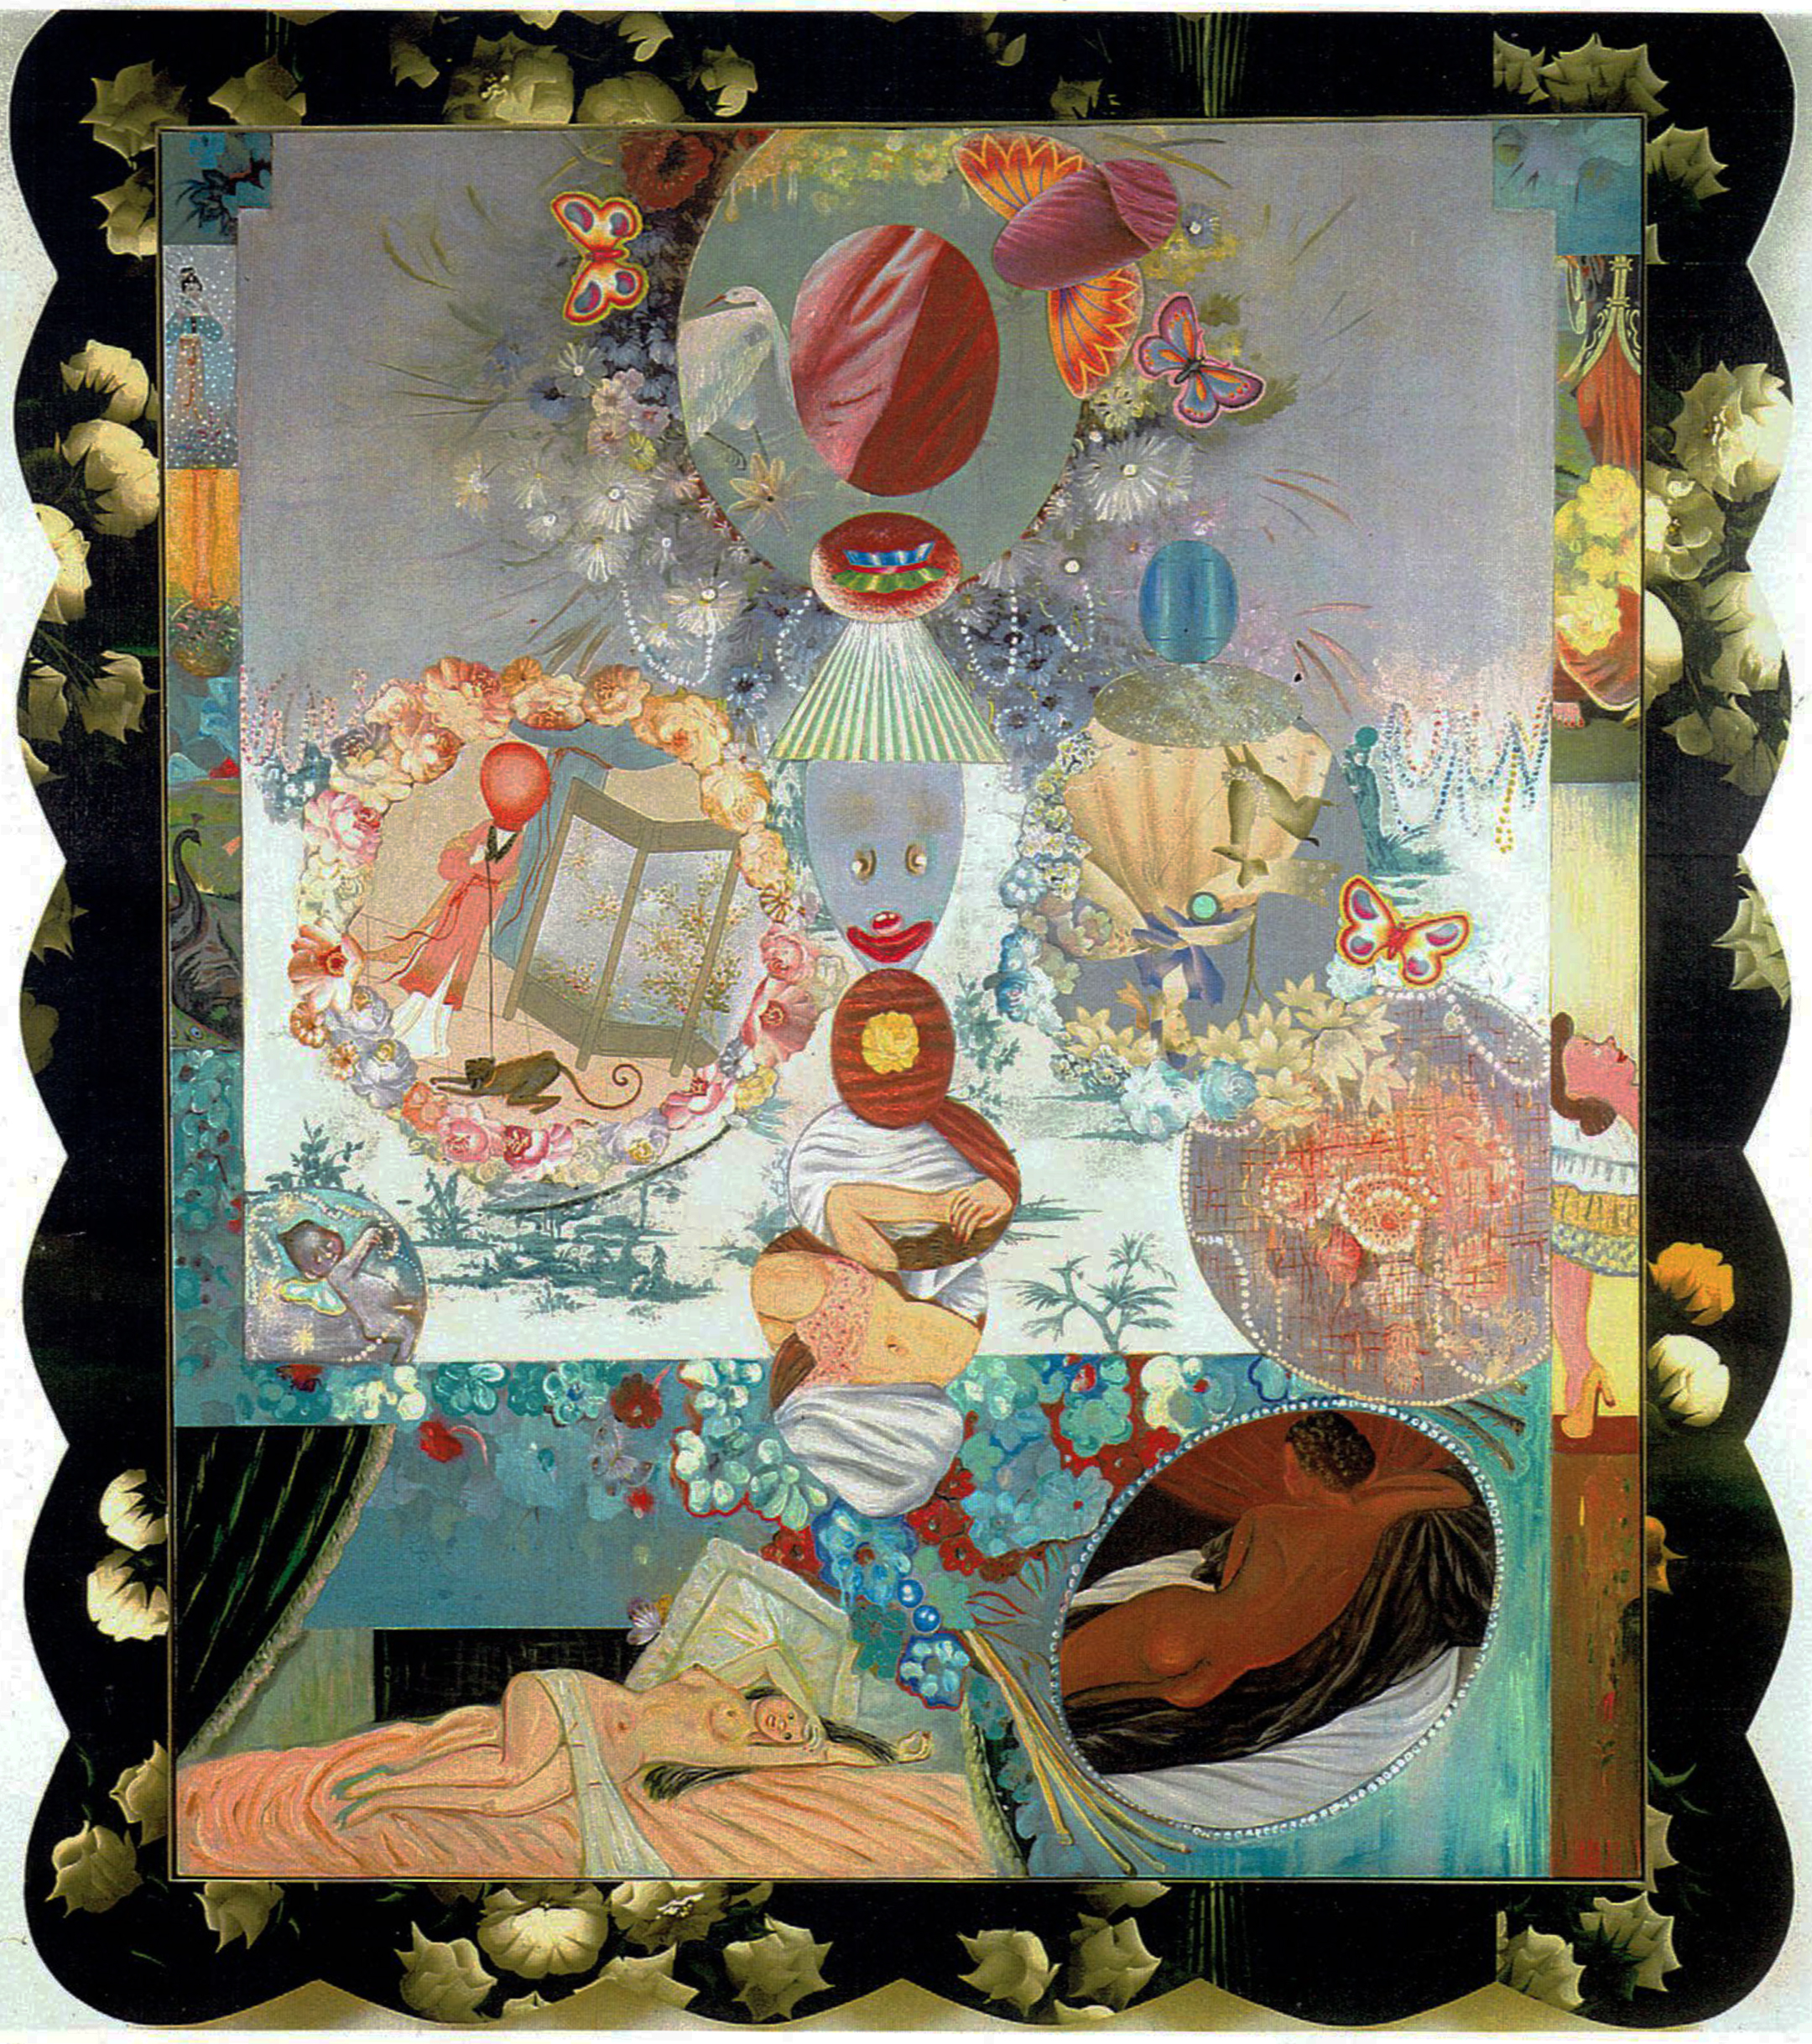 A Submissive Moment, 84" x 72", mixed media and found objects, 1996 